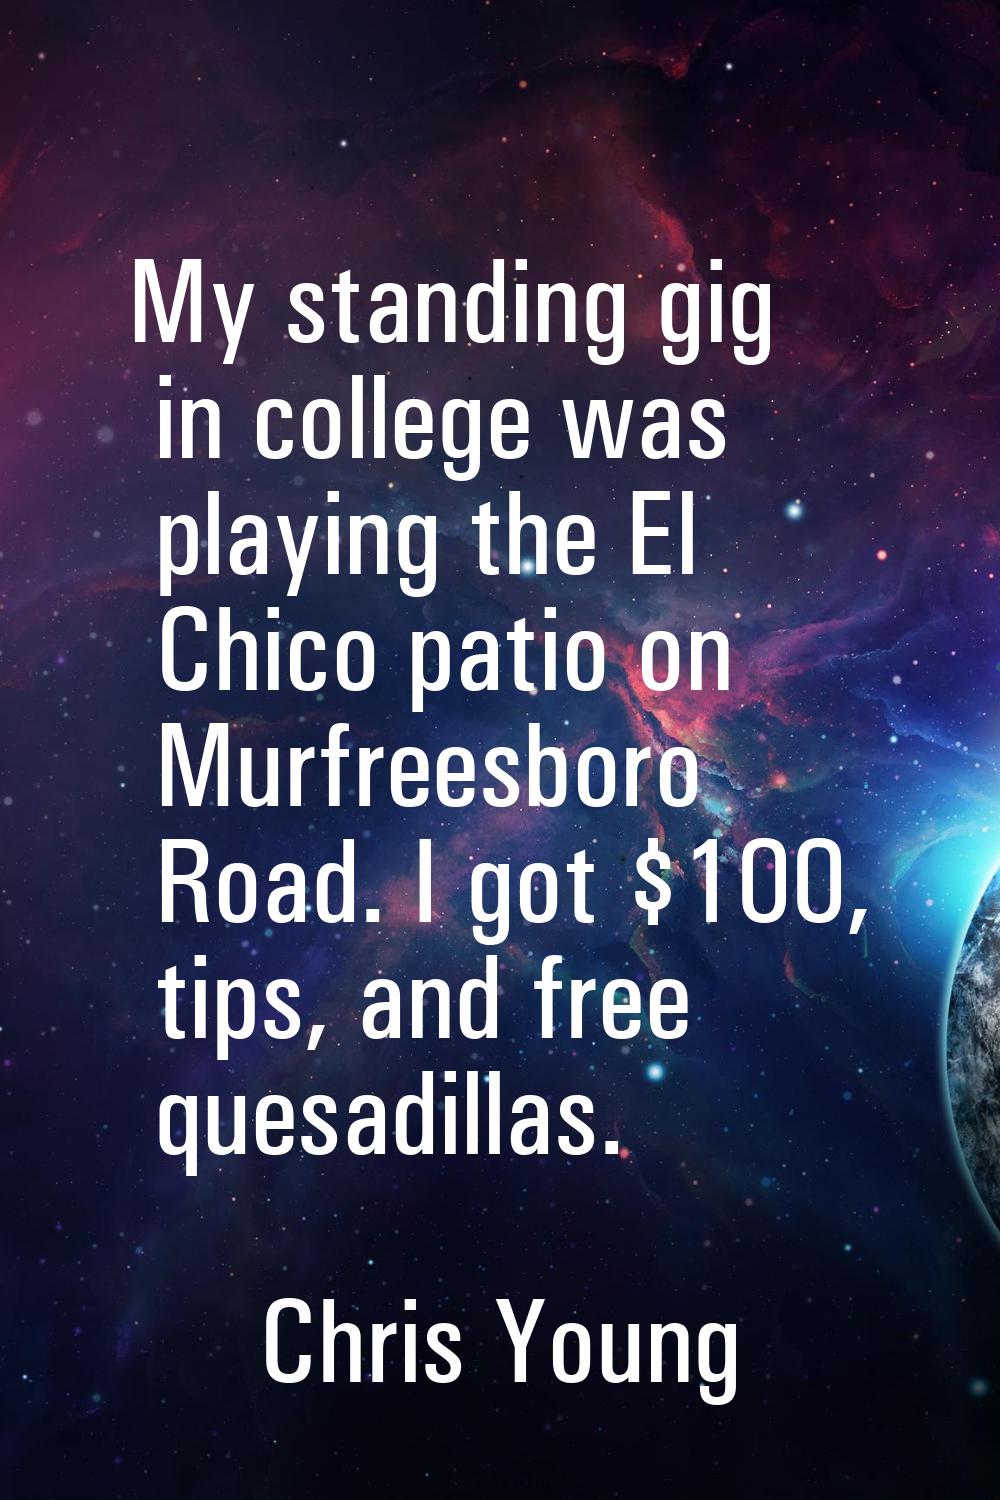 My standing gig in college was playing the El Chico patio on Murfreesboro Road. I got $100, tips, a